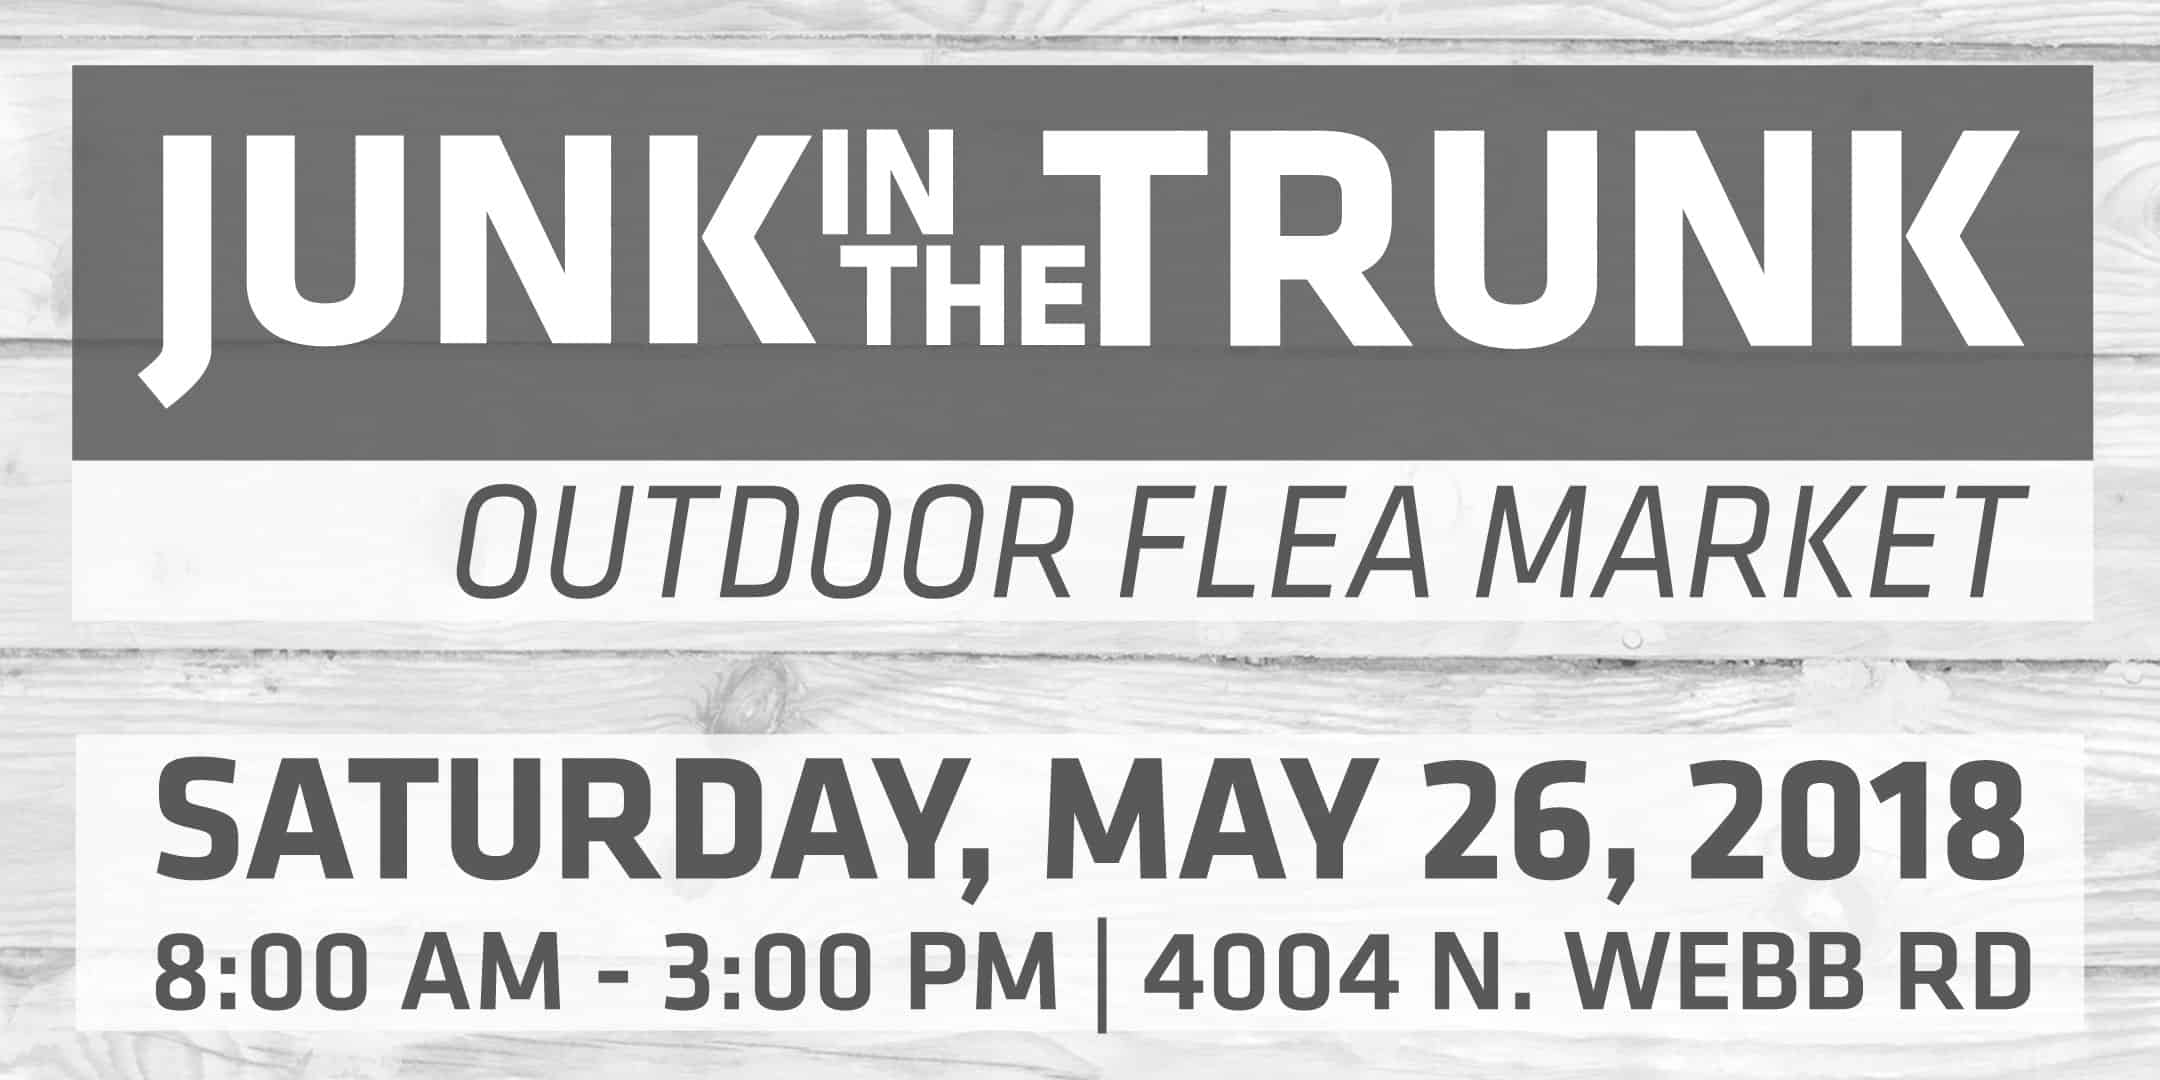 Junk in the trunk outdoor flea market saturday may 26, 2018. 8:00 am to 3:00 pm at 4004 N. Webb Rd